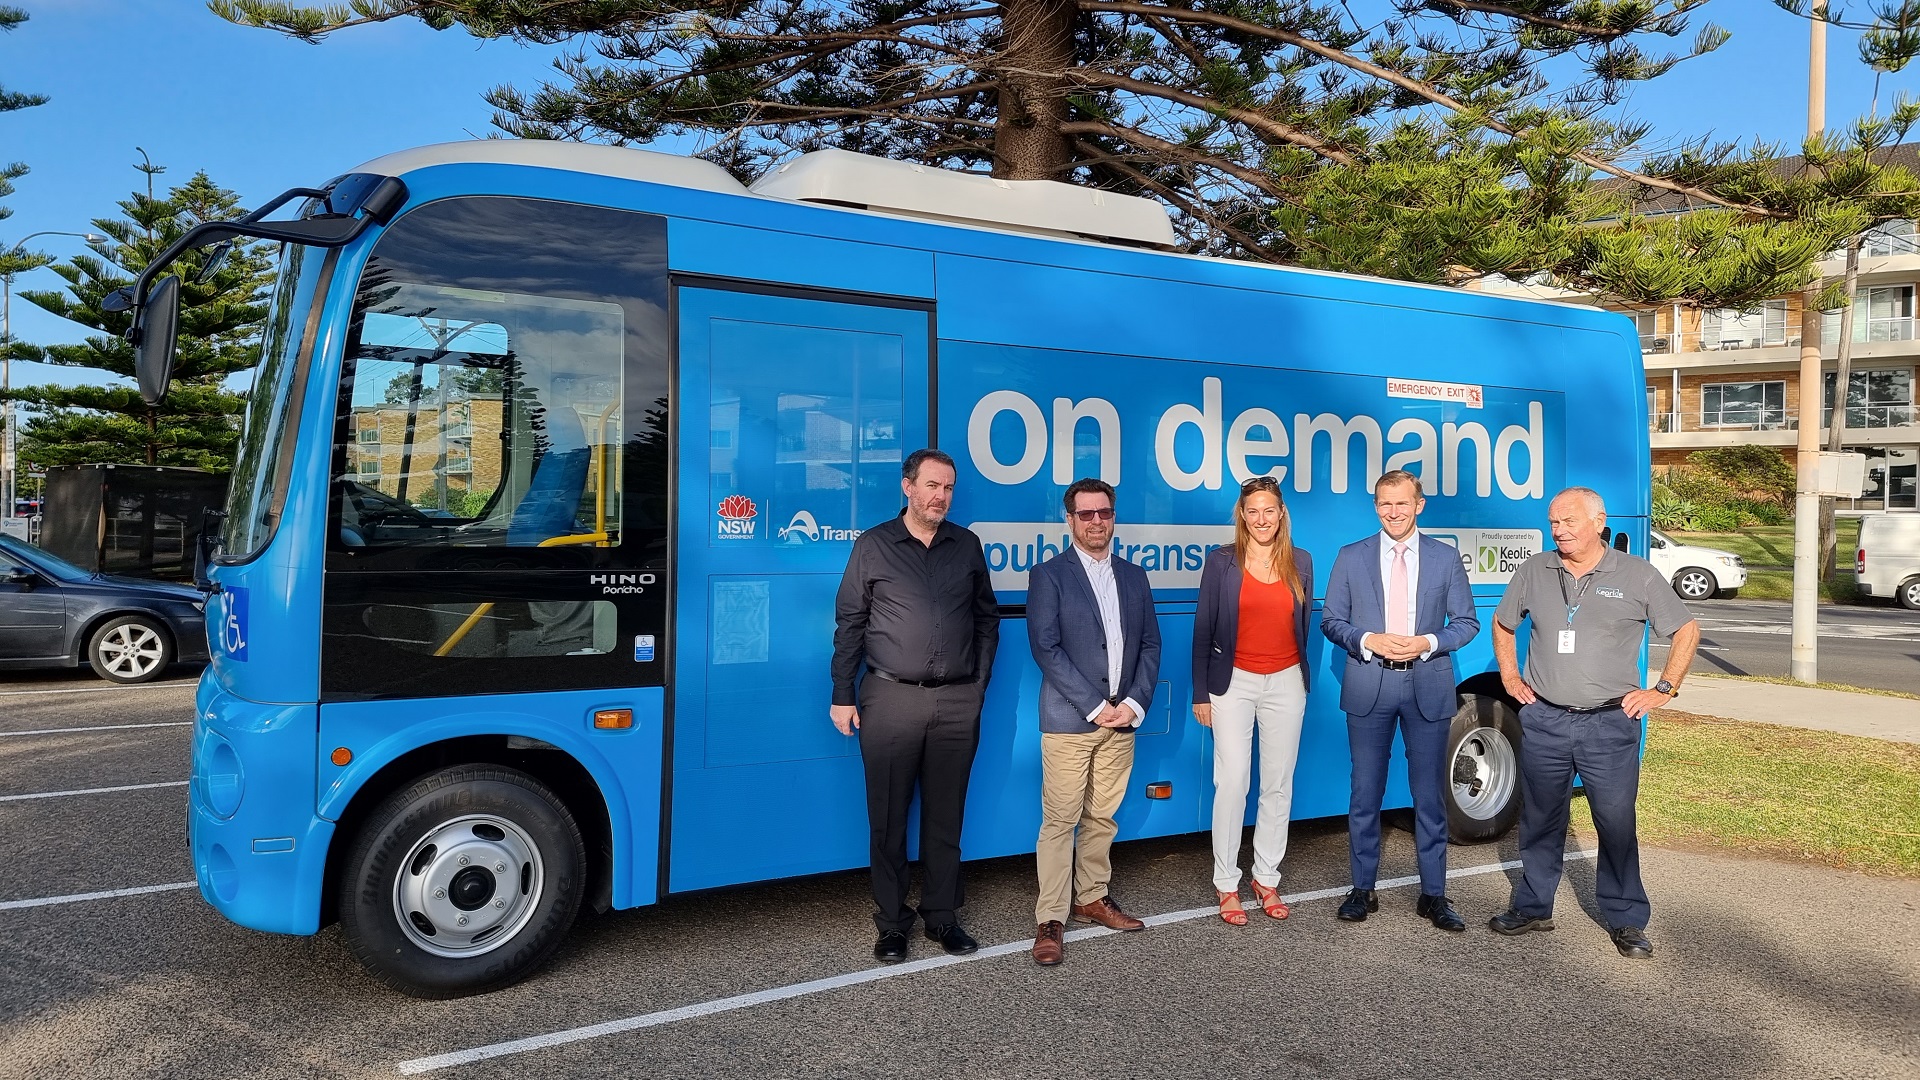 Keoride On Demand Transport celebrates its four-year anniversary and introduces new fully accessible vehicles in the Northern Beaches